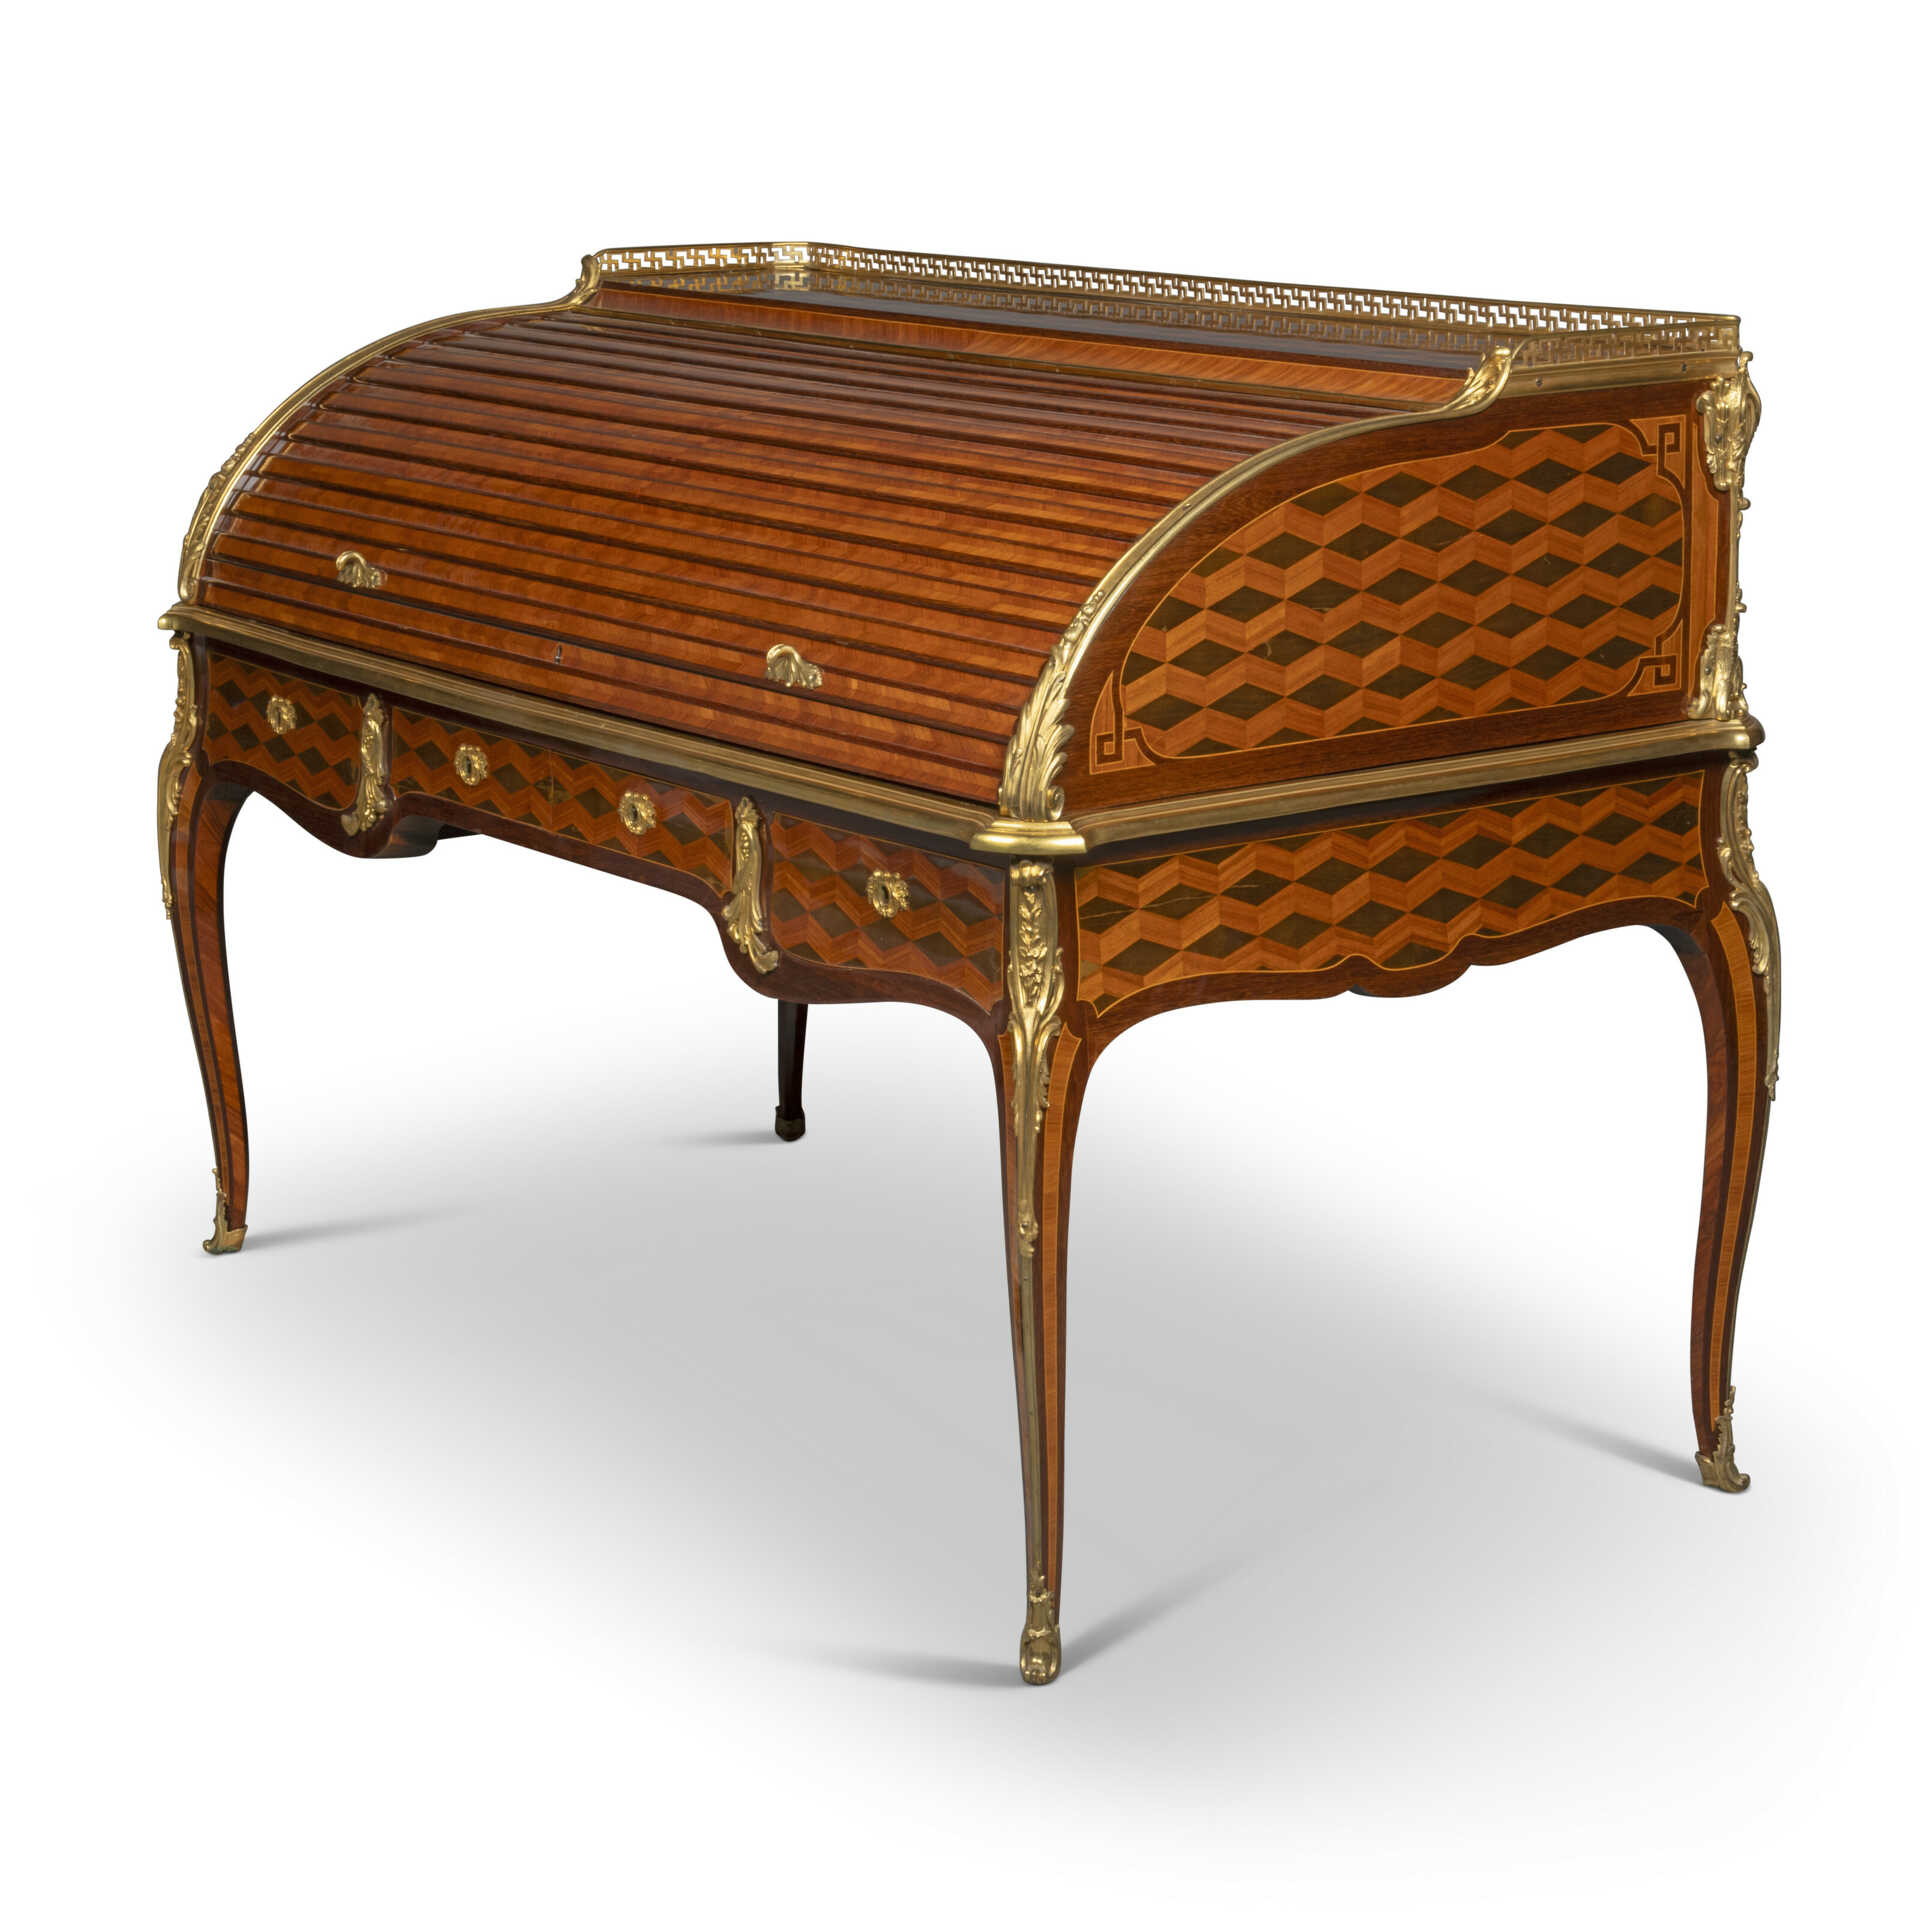 A LOUIS XV ORMOLU-MOUNTED AMARANTH, BOIS SATINE, TULIPWOOD AND GREEN-STAINED SYCAMORE BUREAU A CYLINDRE